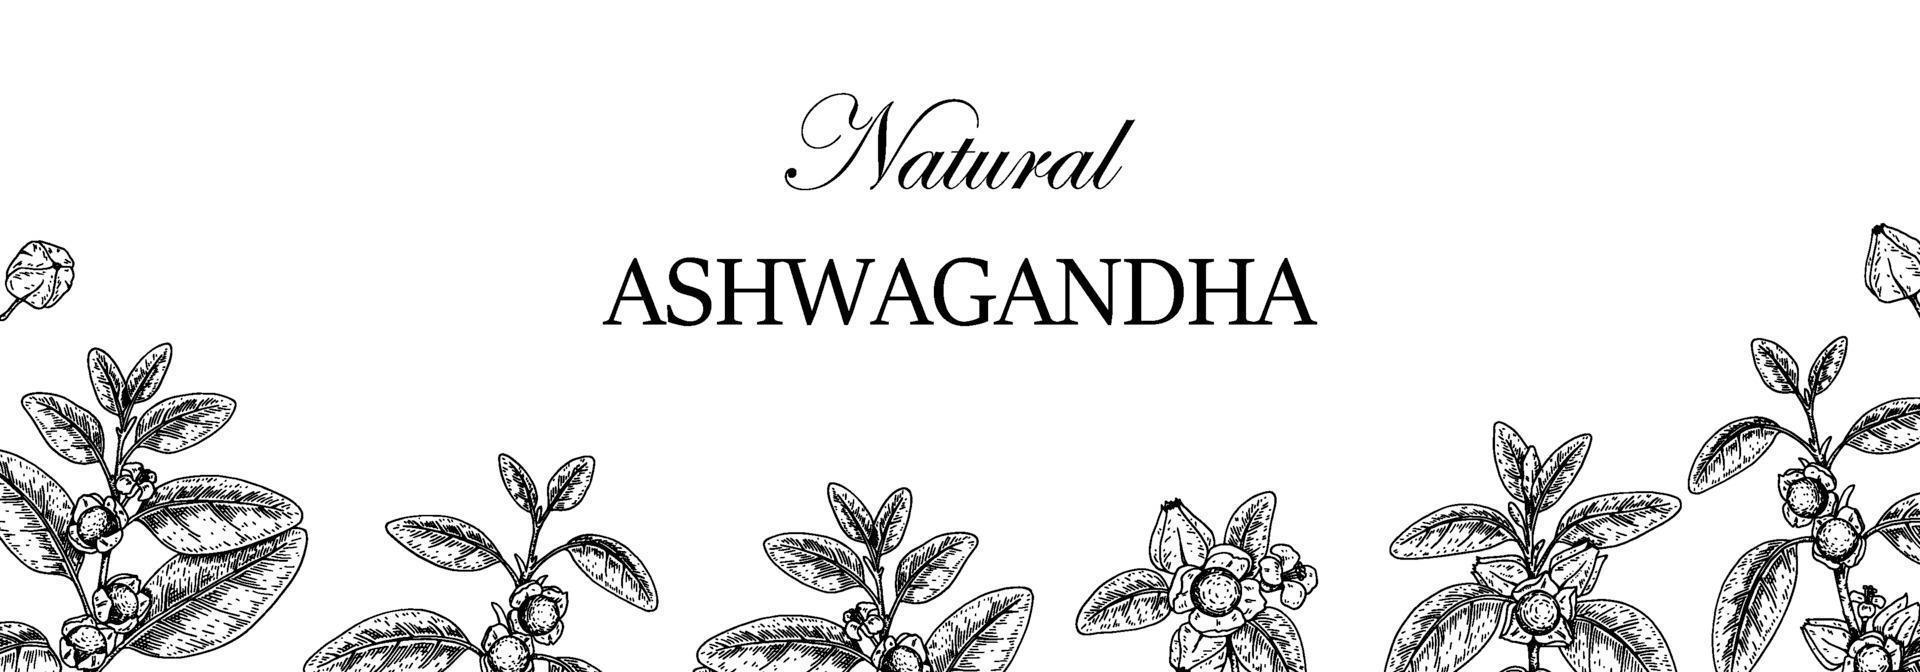 Hand drawn horizontal Ashwagandha design with branches and berries isolated on white background. Vector illustration in sketch style.